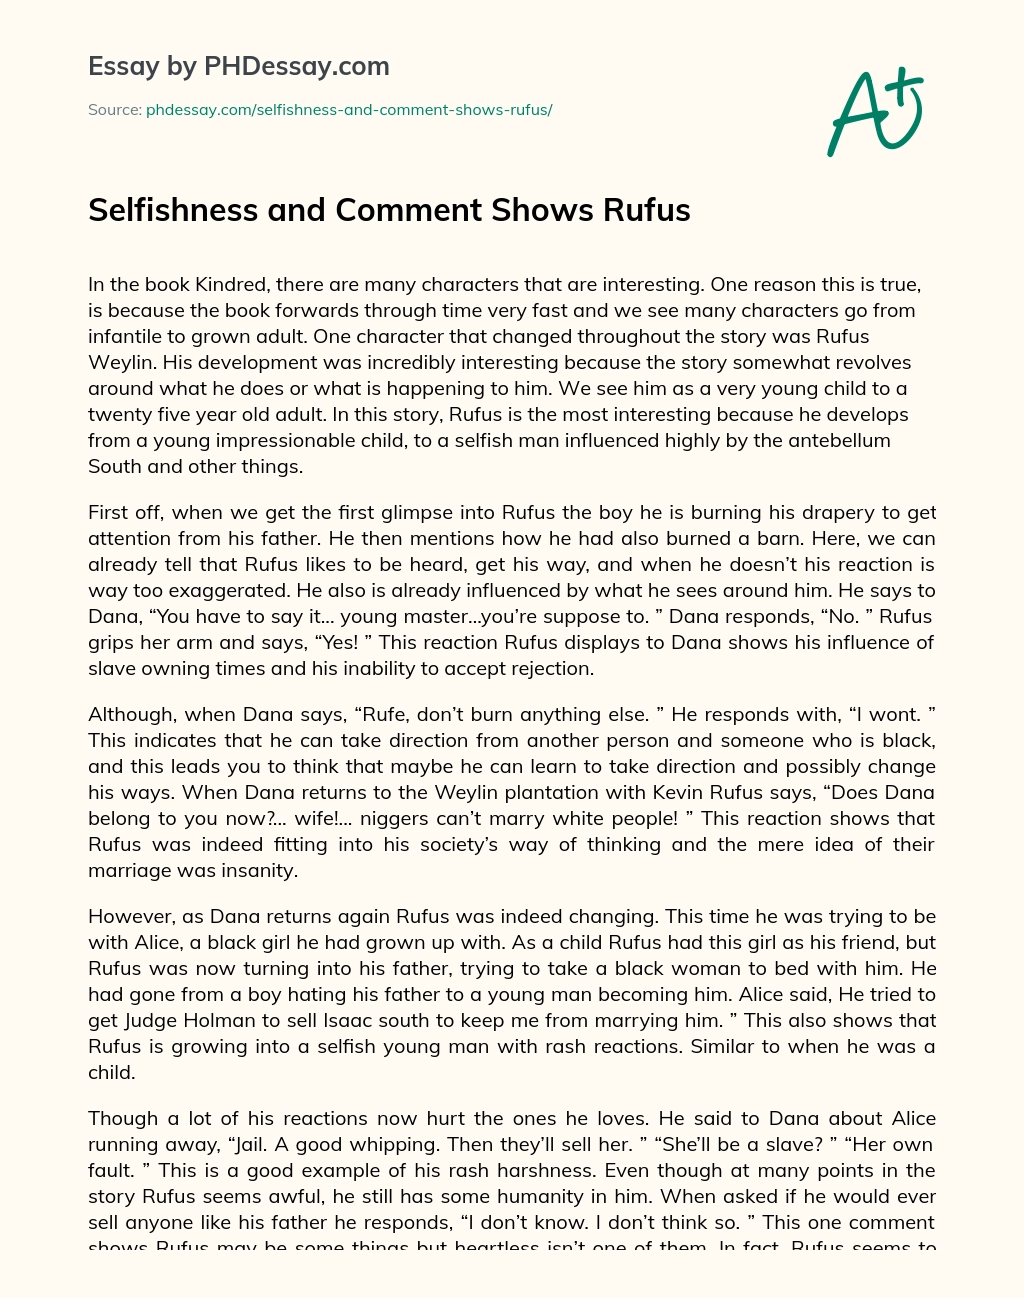 Selfishness and Comment Shows Rufus essay